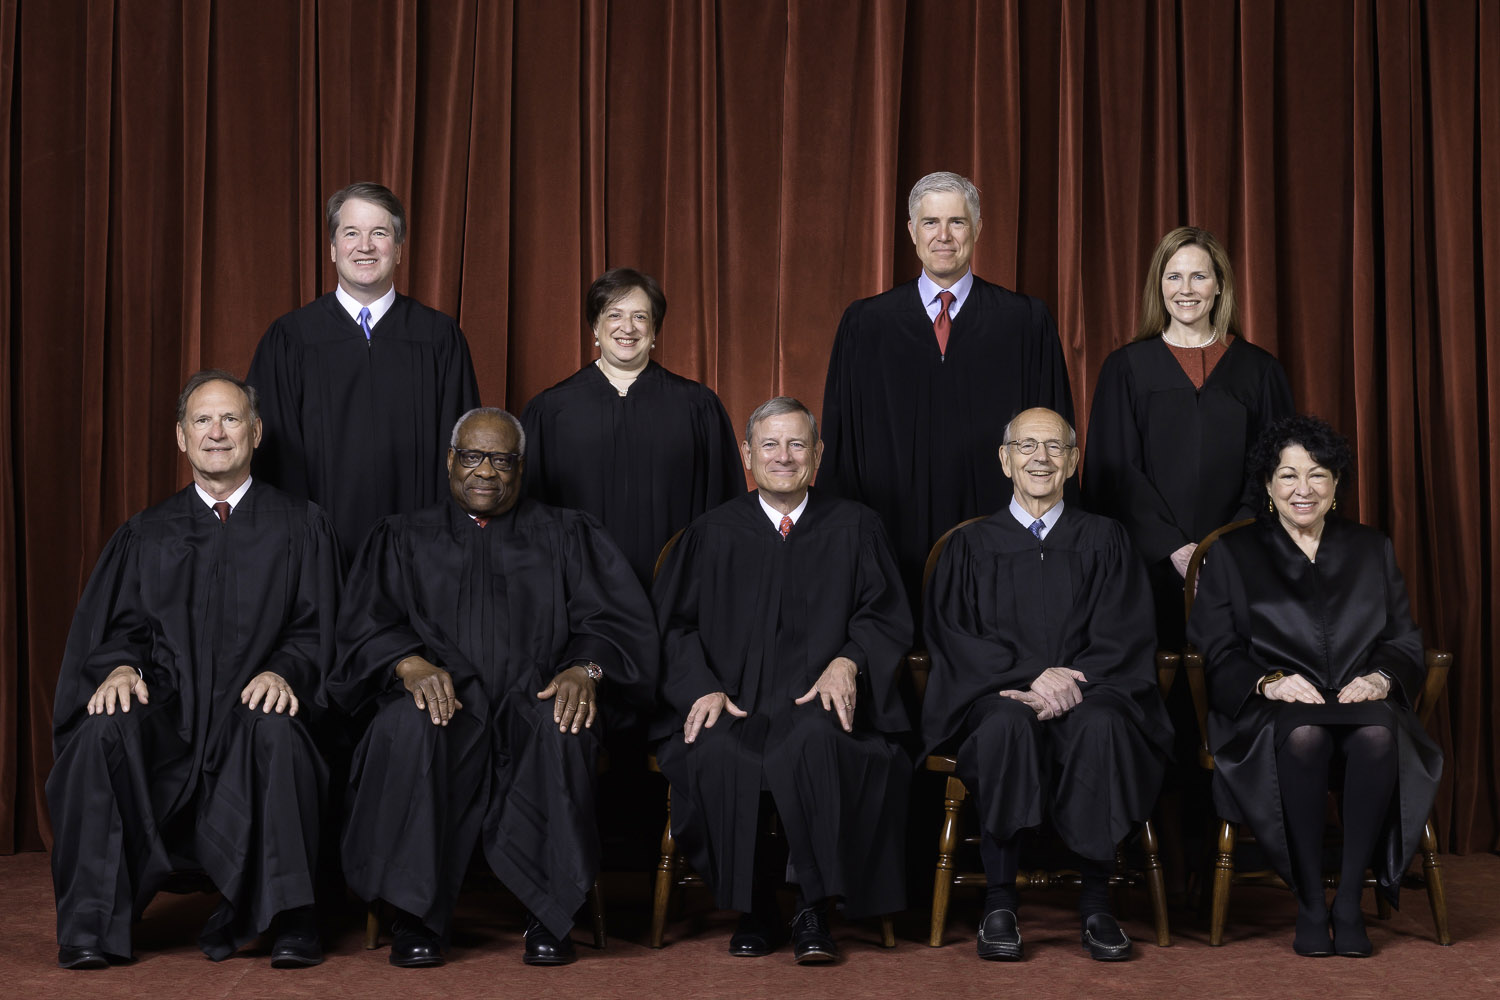 A formal portrait of the justices of the Supreme Court in their black robes in front of a dark red curtain.